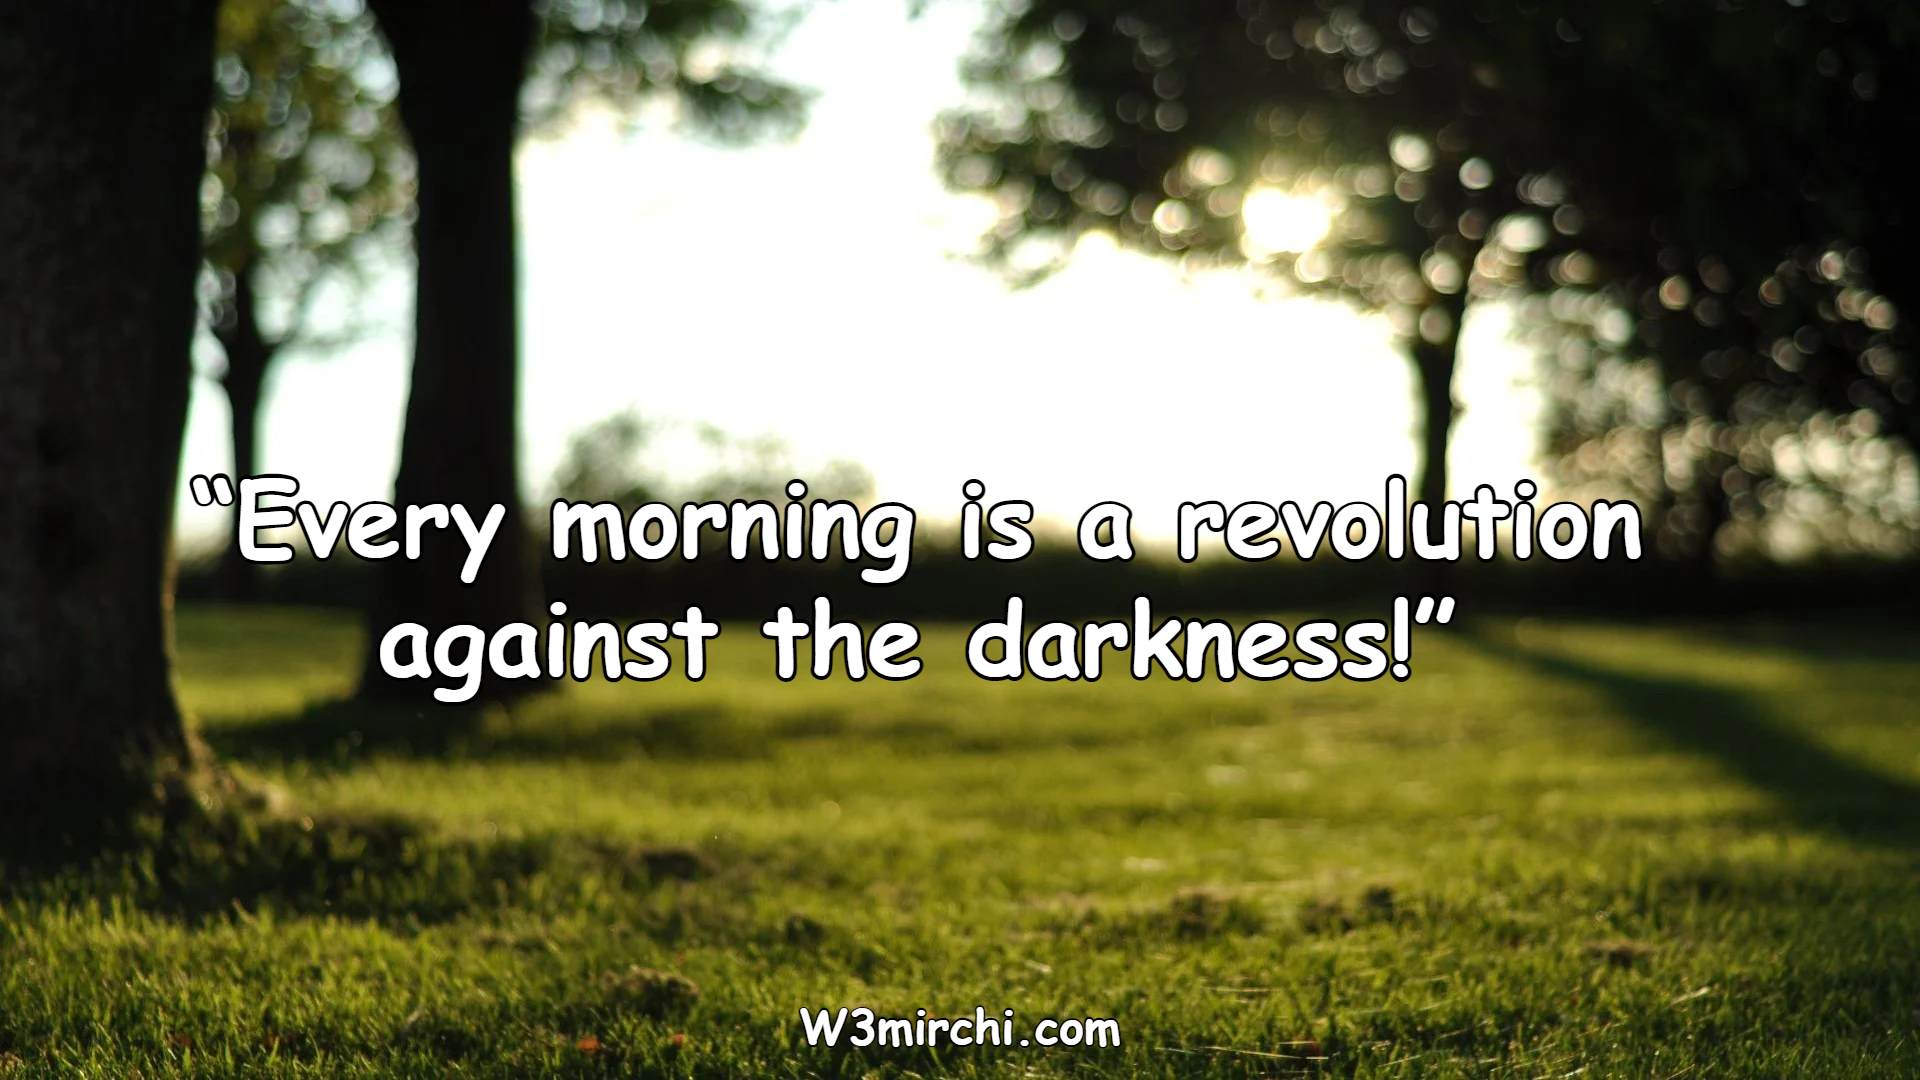 “Every morning is a revolution